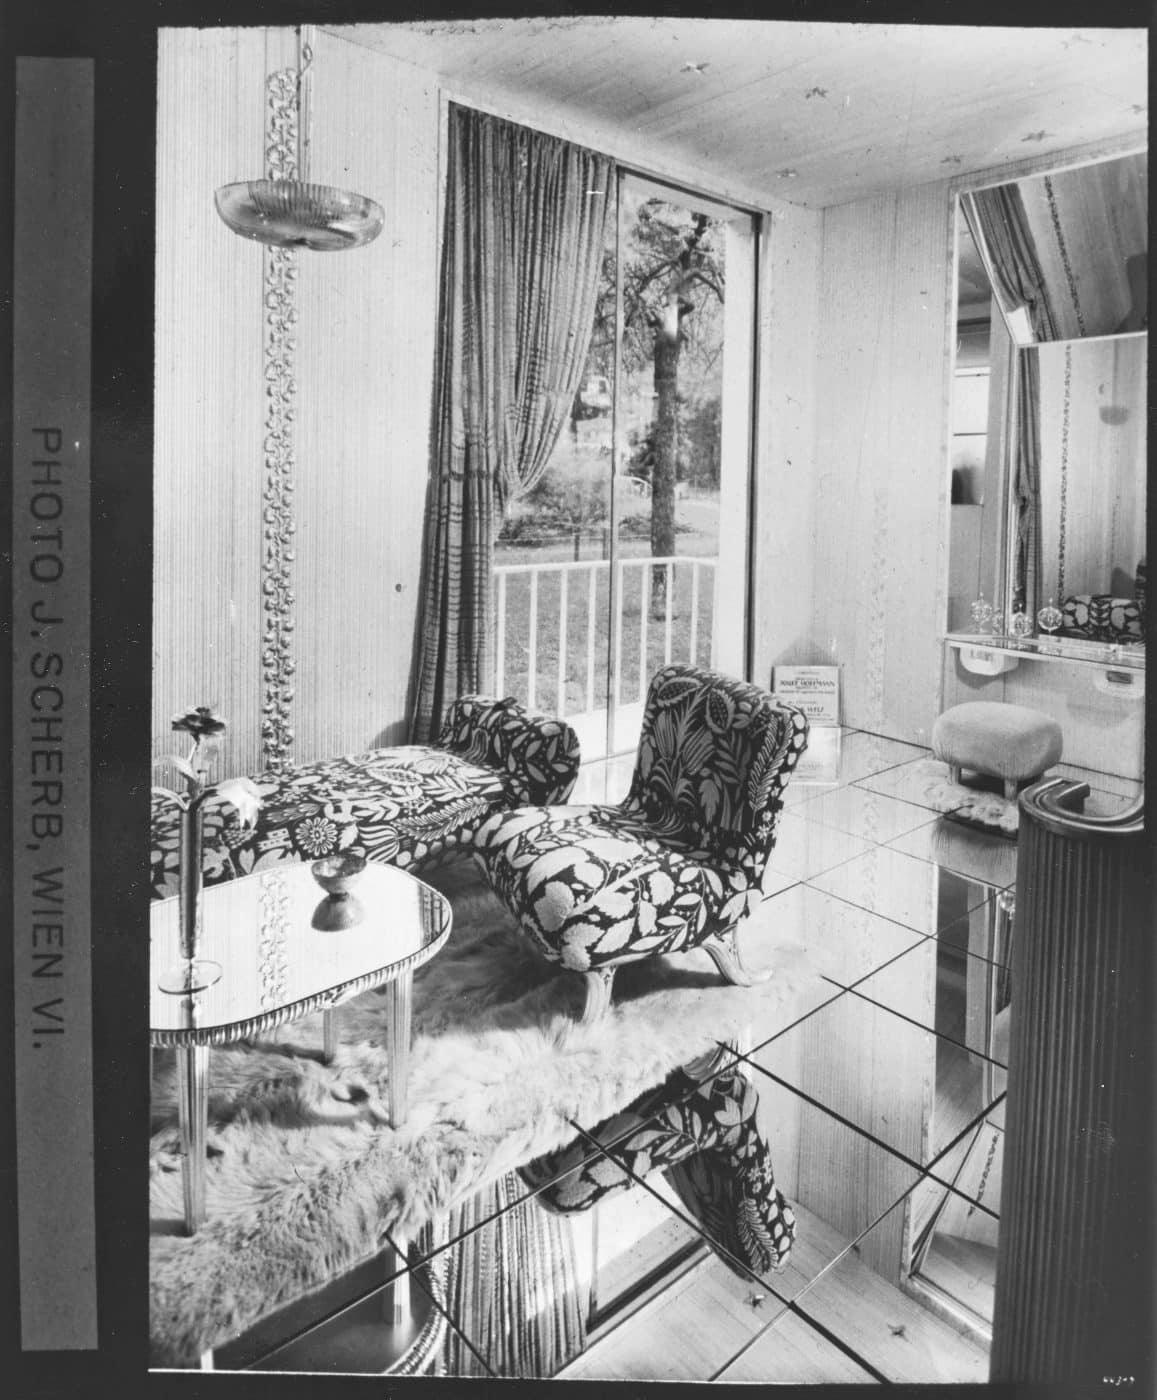 The Boudoir for a Big Star, with walls covered in metal leaf, by Josef Hoffmann